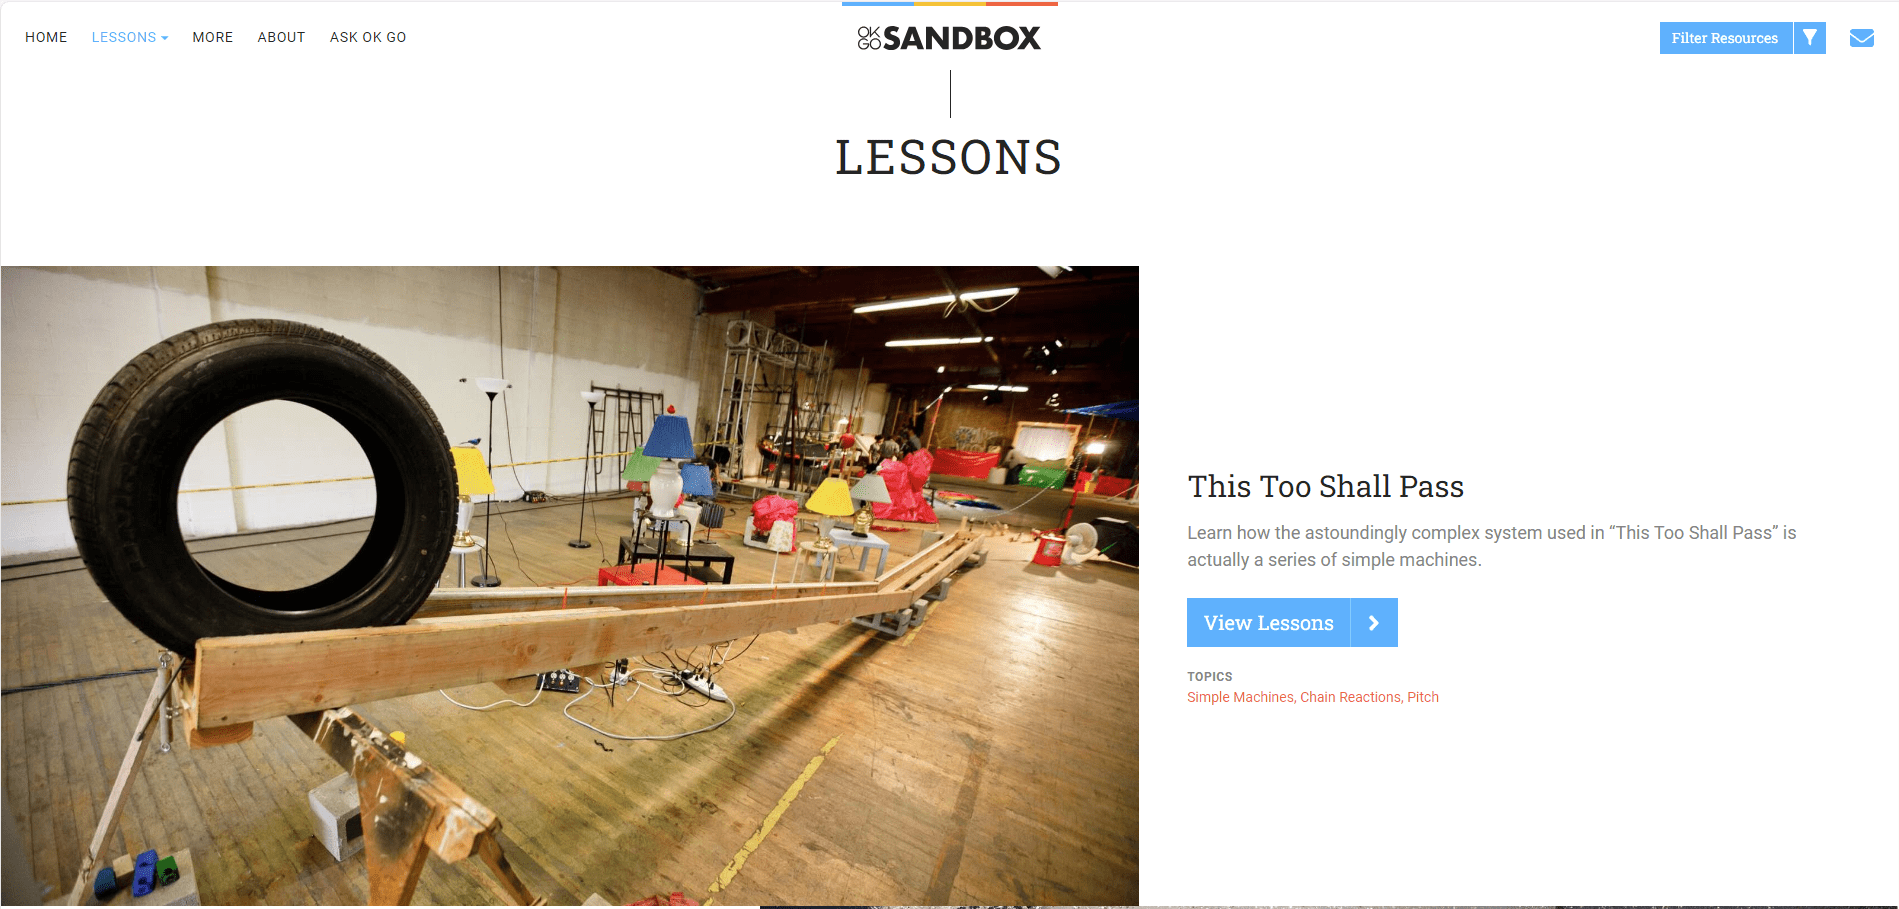 The OK Go Sandbox website uses the band’s videos to teach STEAM lessons 